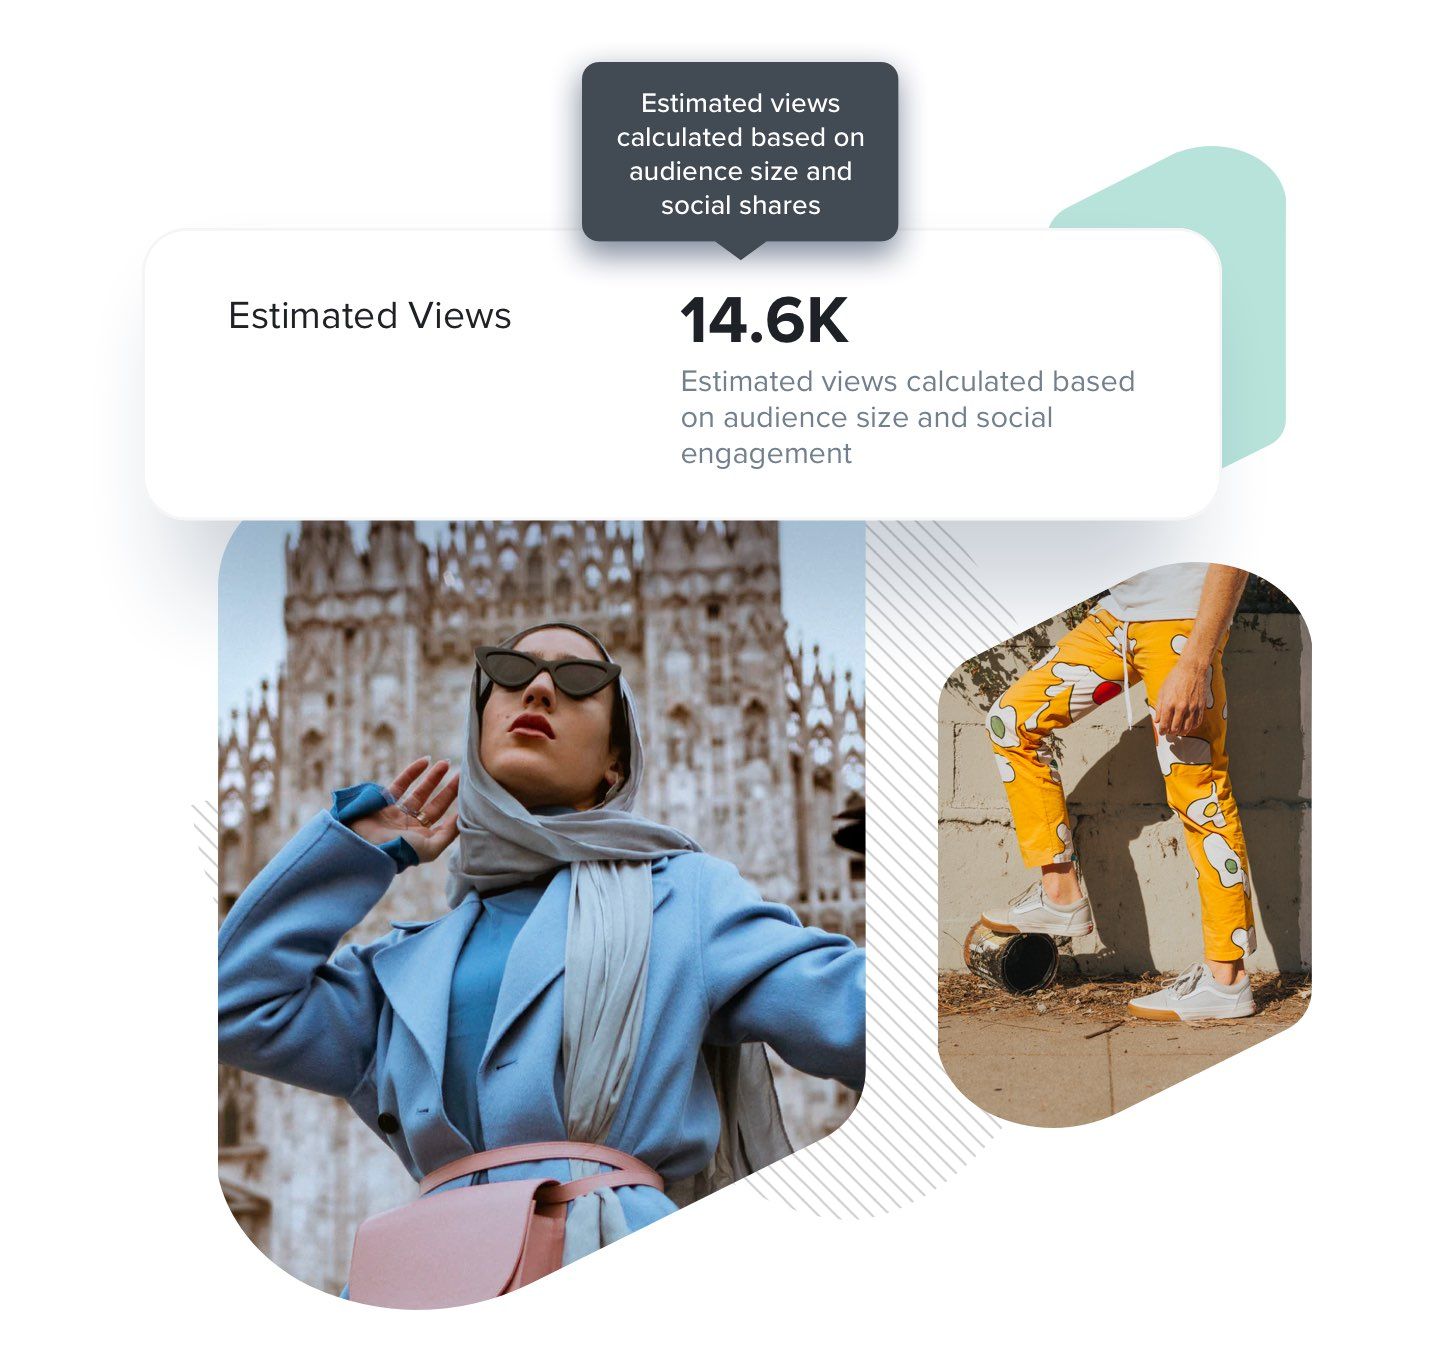 social post images and estimated view metric of 23.4K